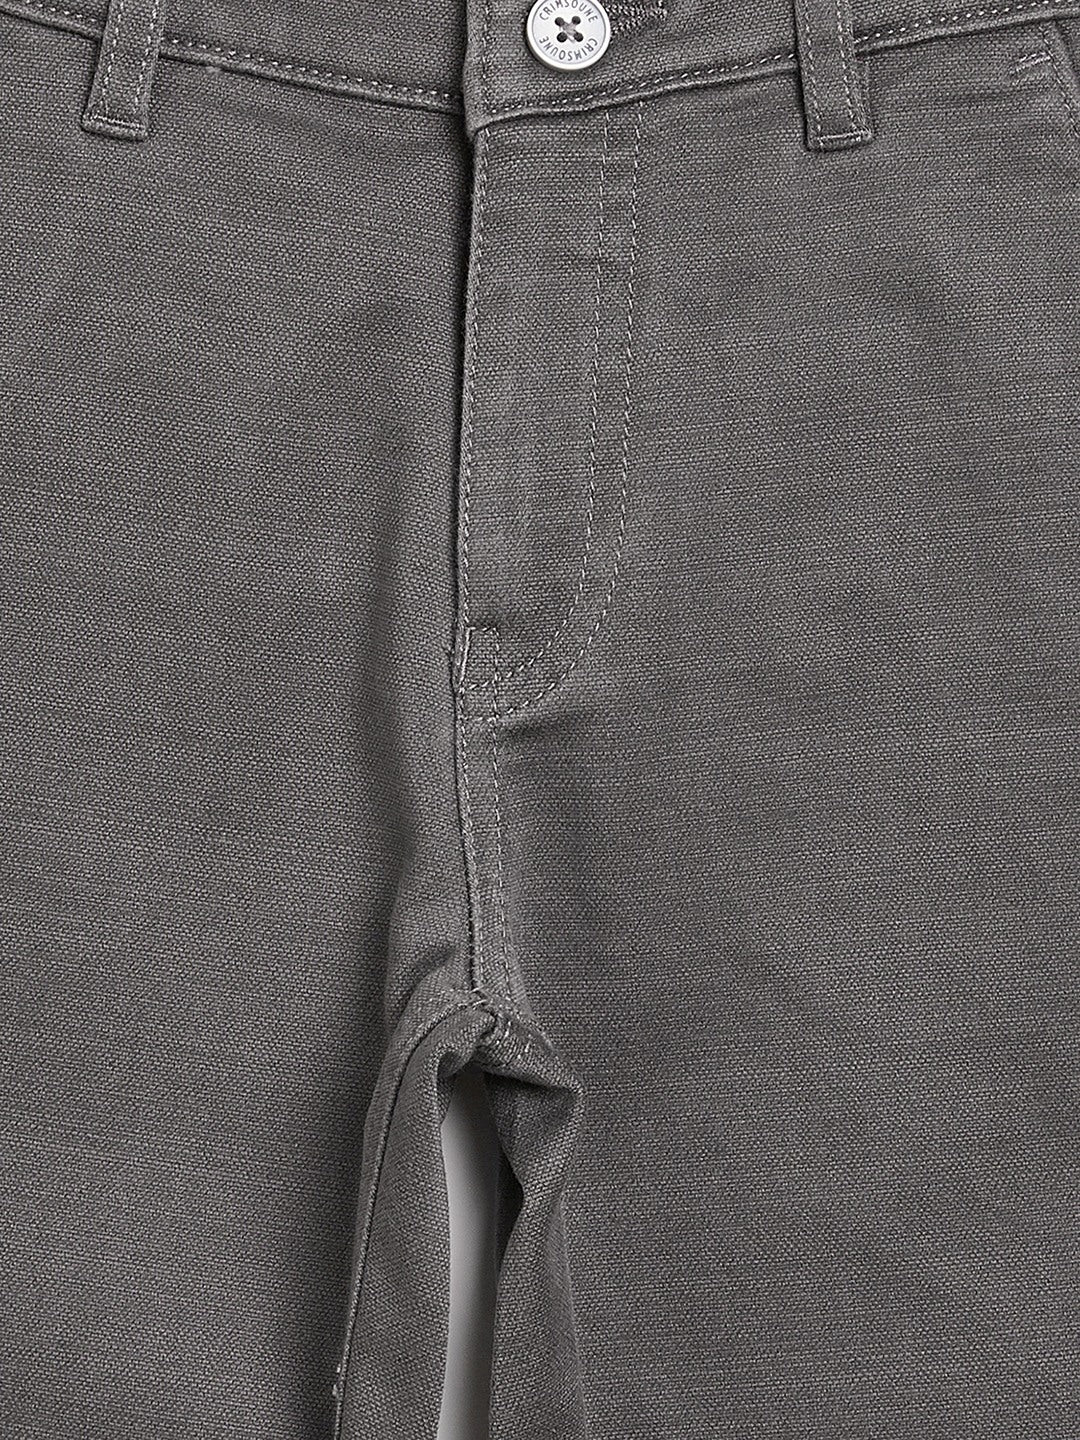 Grey Trousers - Boys Trousers